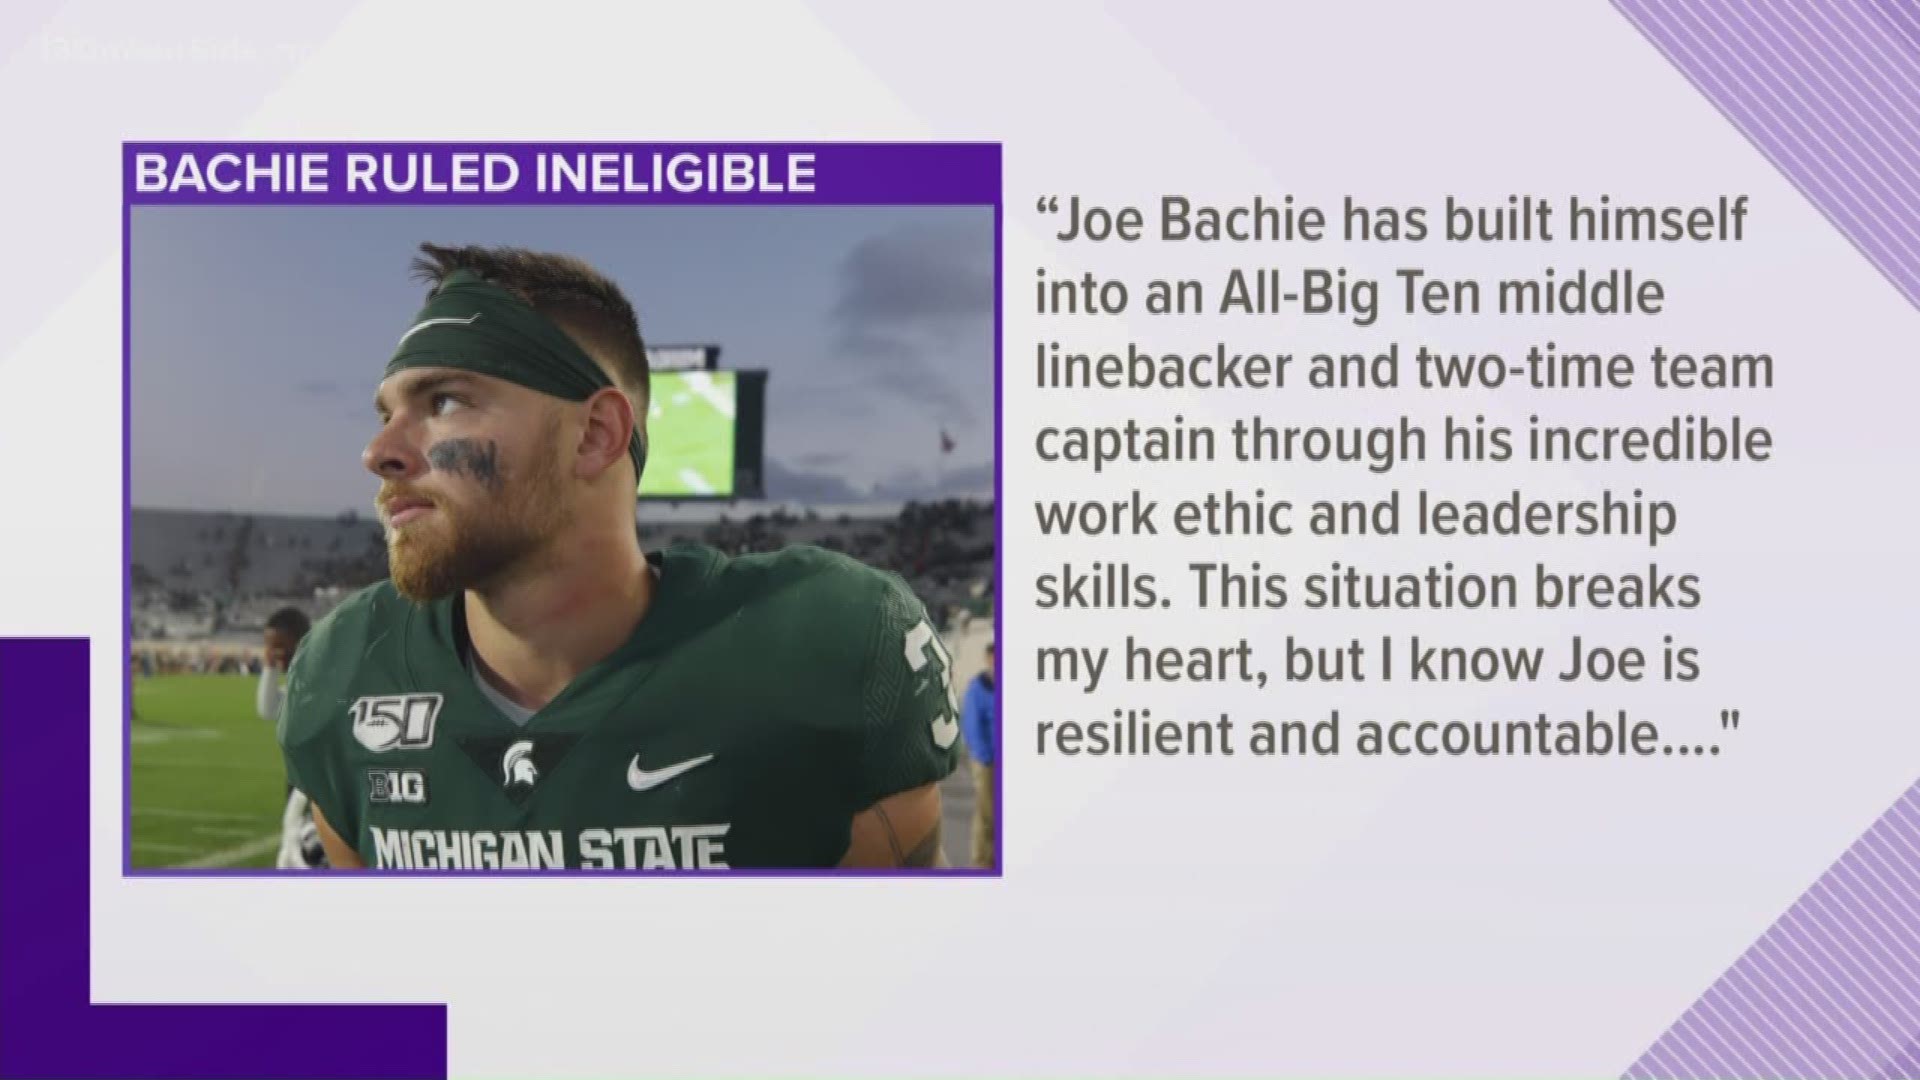 Bachie tested positive for a performance-enhancing substance banned by the Big Ten.